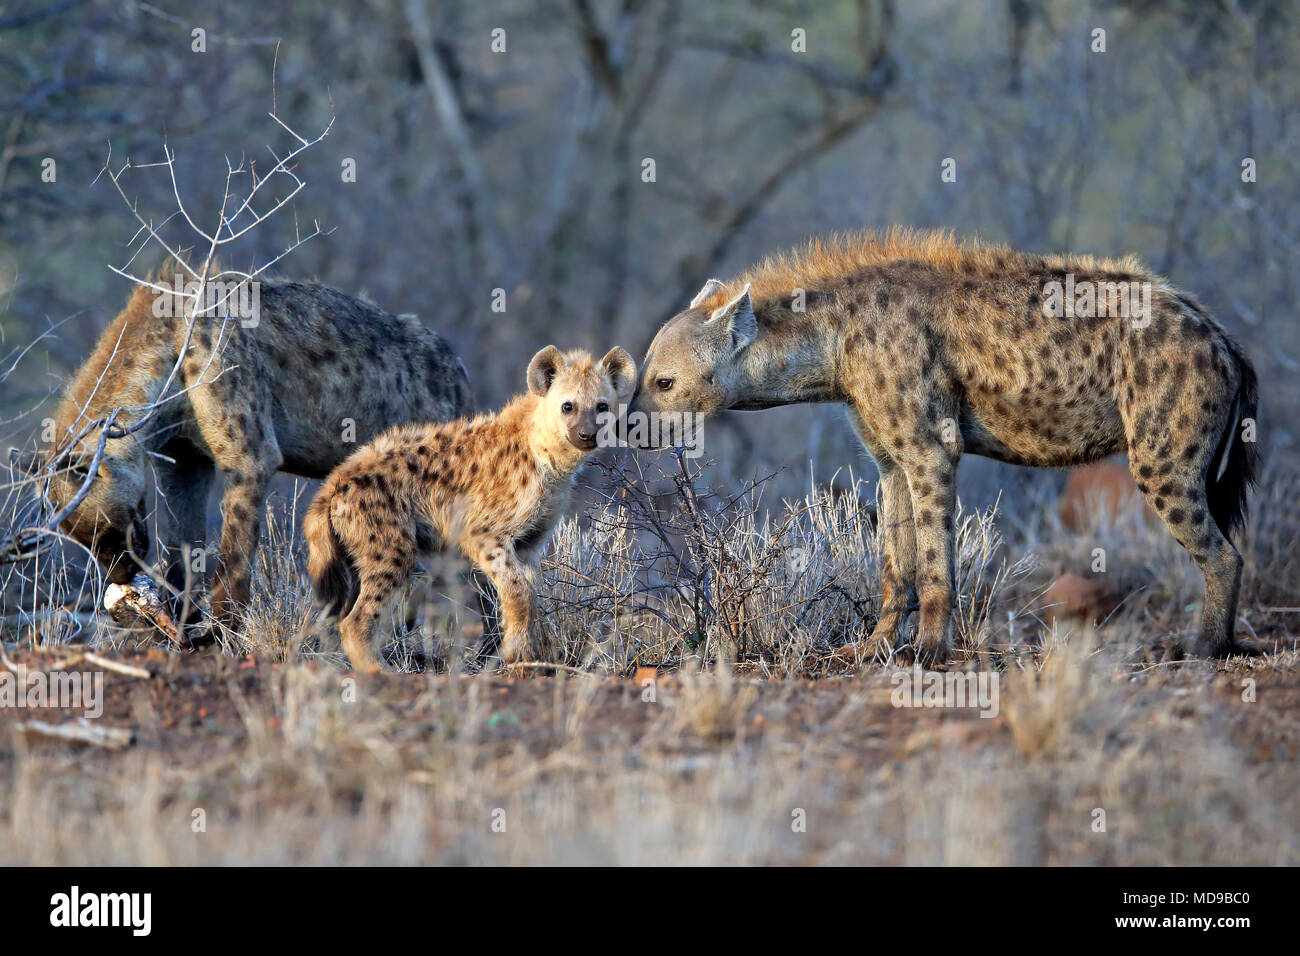 Spotted hyenas (Crocuta crocuta), Old animals with young animals, animal group, social behaviour, Kruger National Park Stock Photo